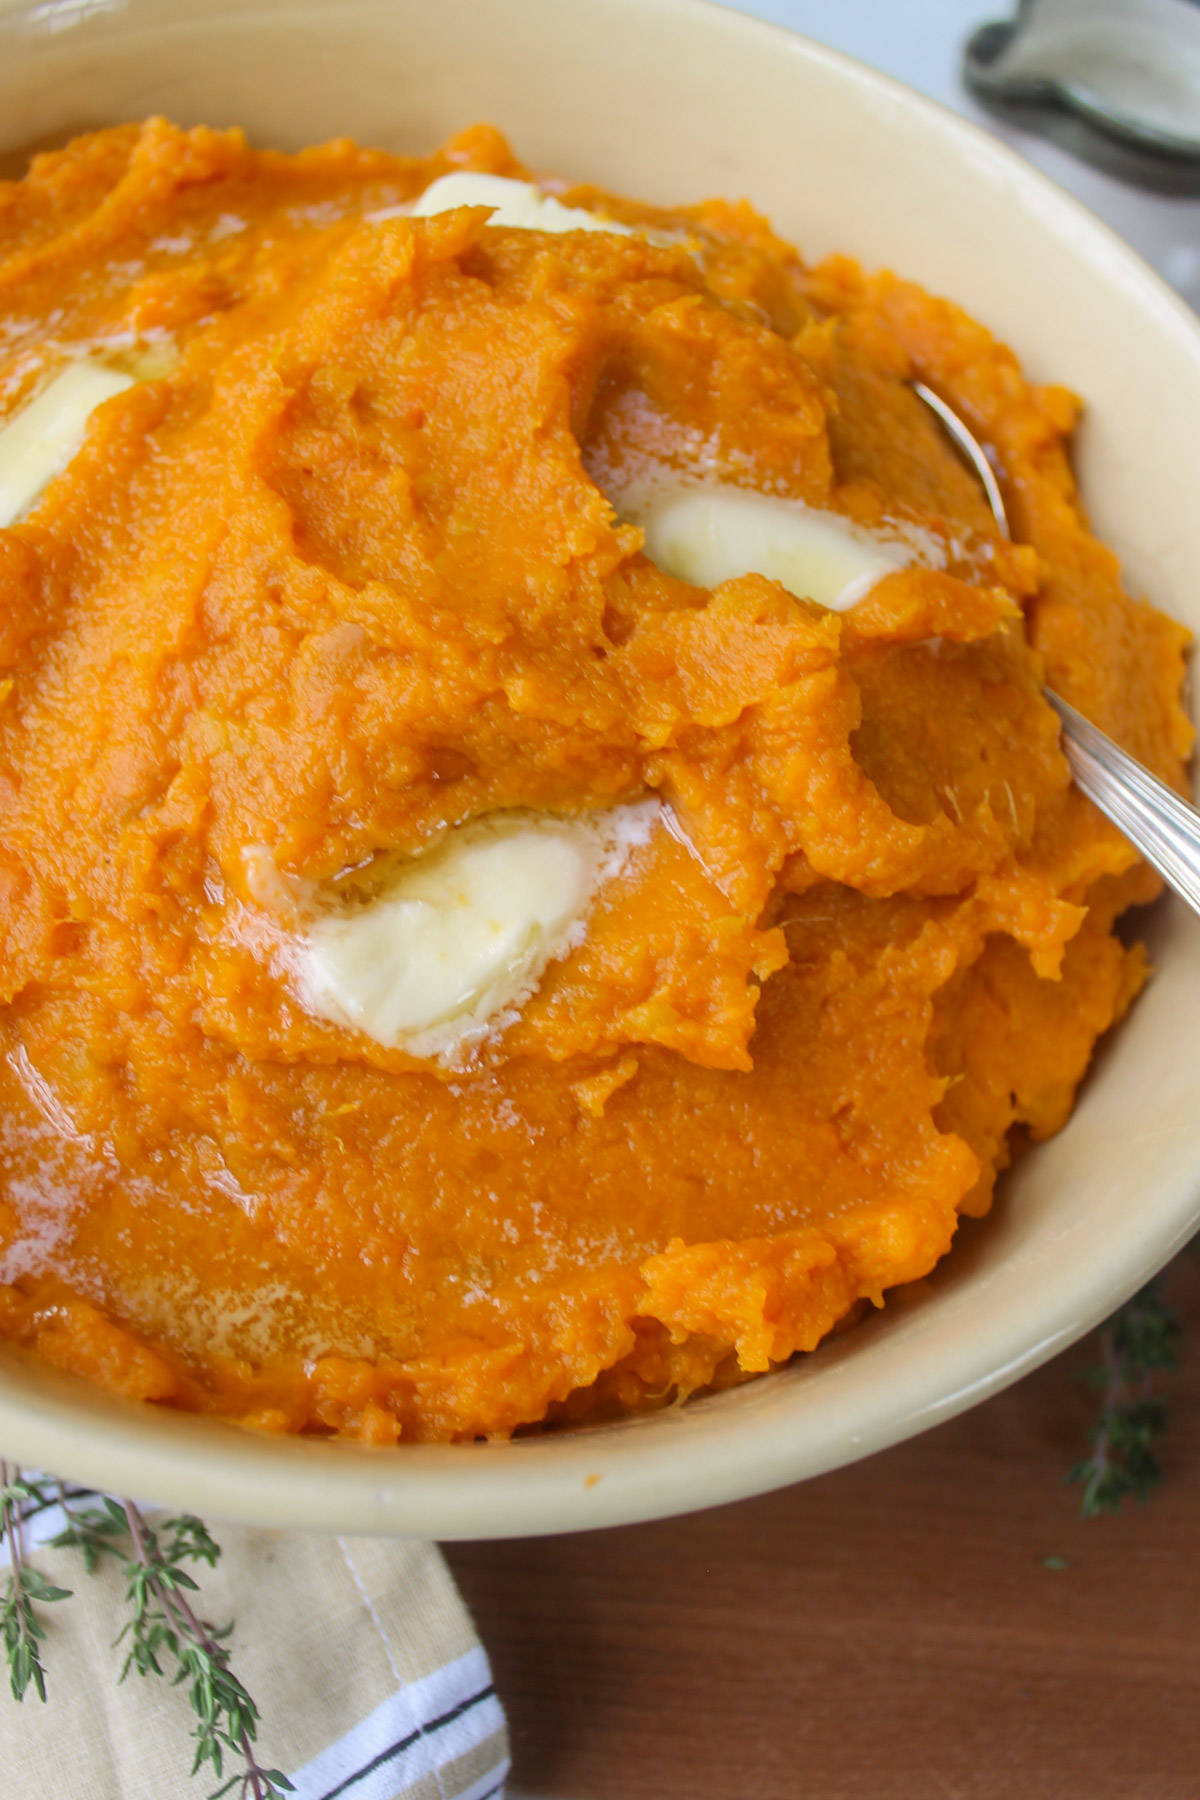 A bowl of mashed sweet potatoes on a wooden cutting board.